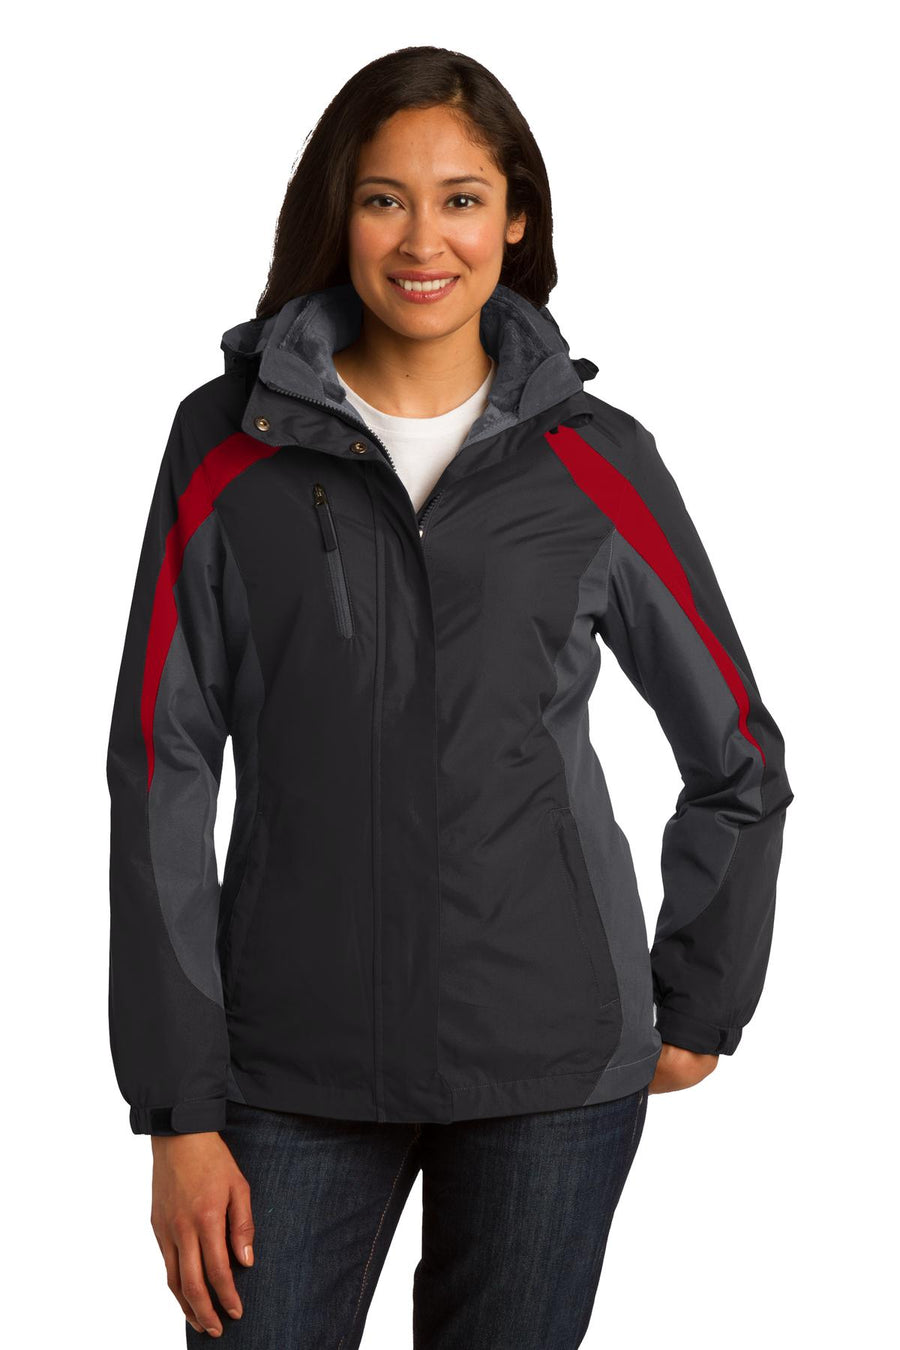 Port Authority Colorblock 3-in-1 Jacket.